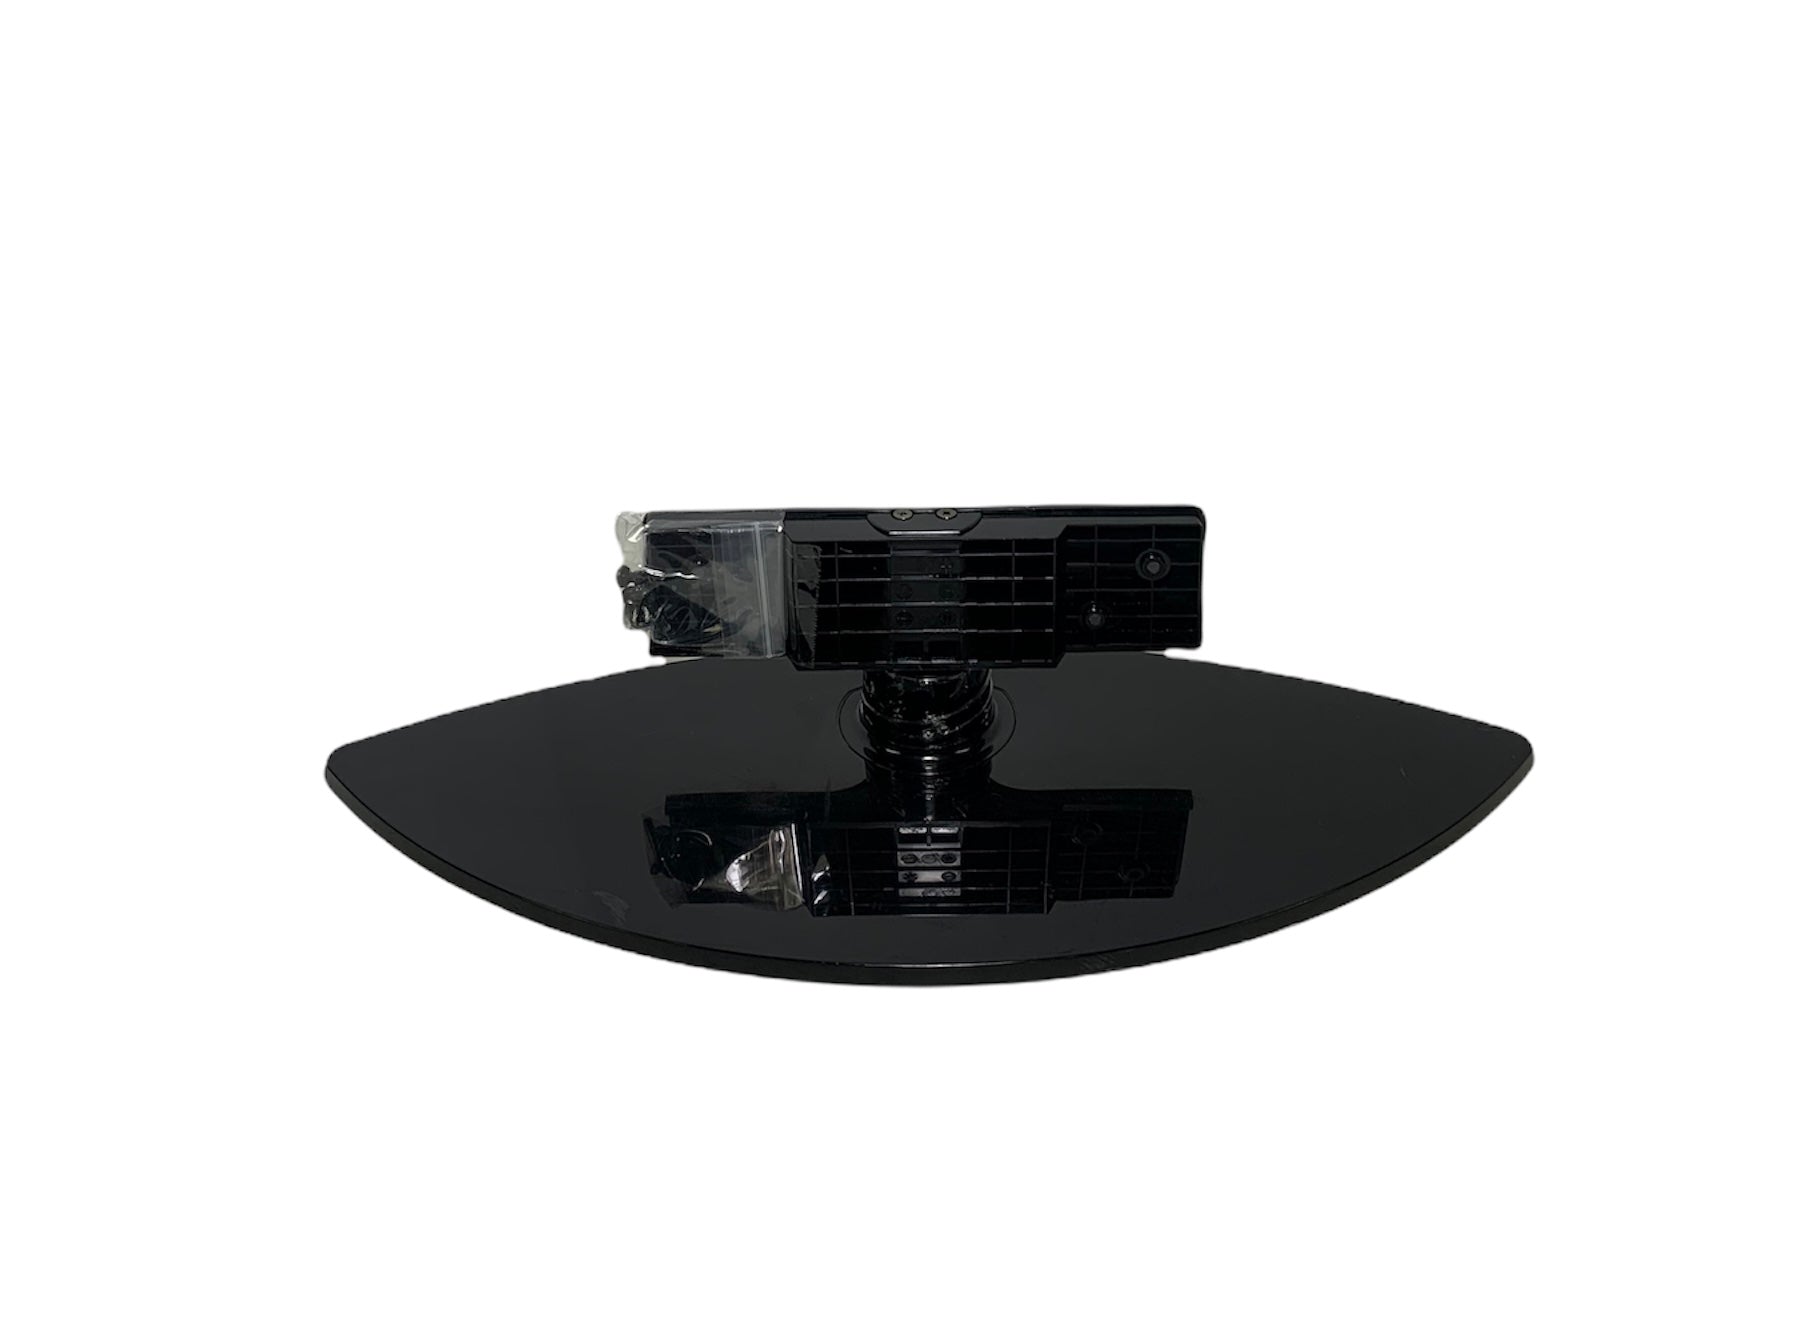 Westinghouse LD-3257DF TV Stand/Base